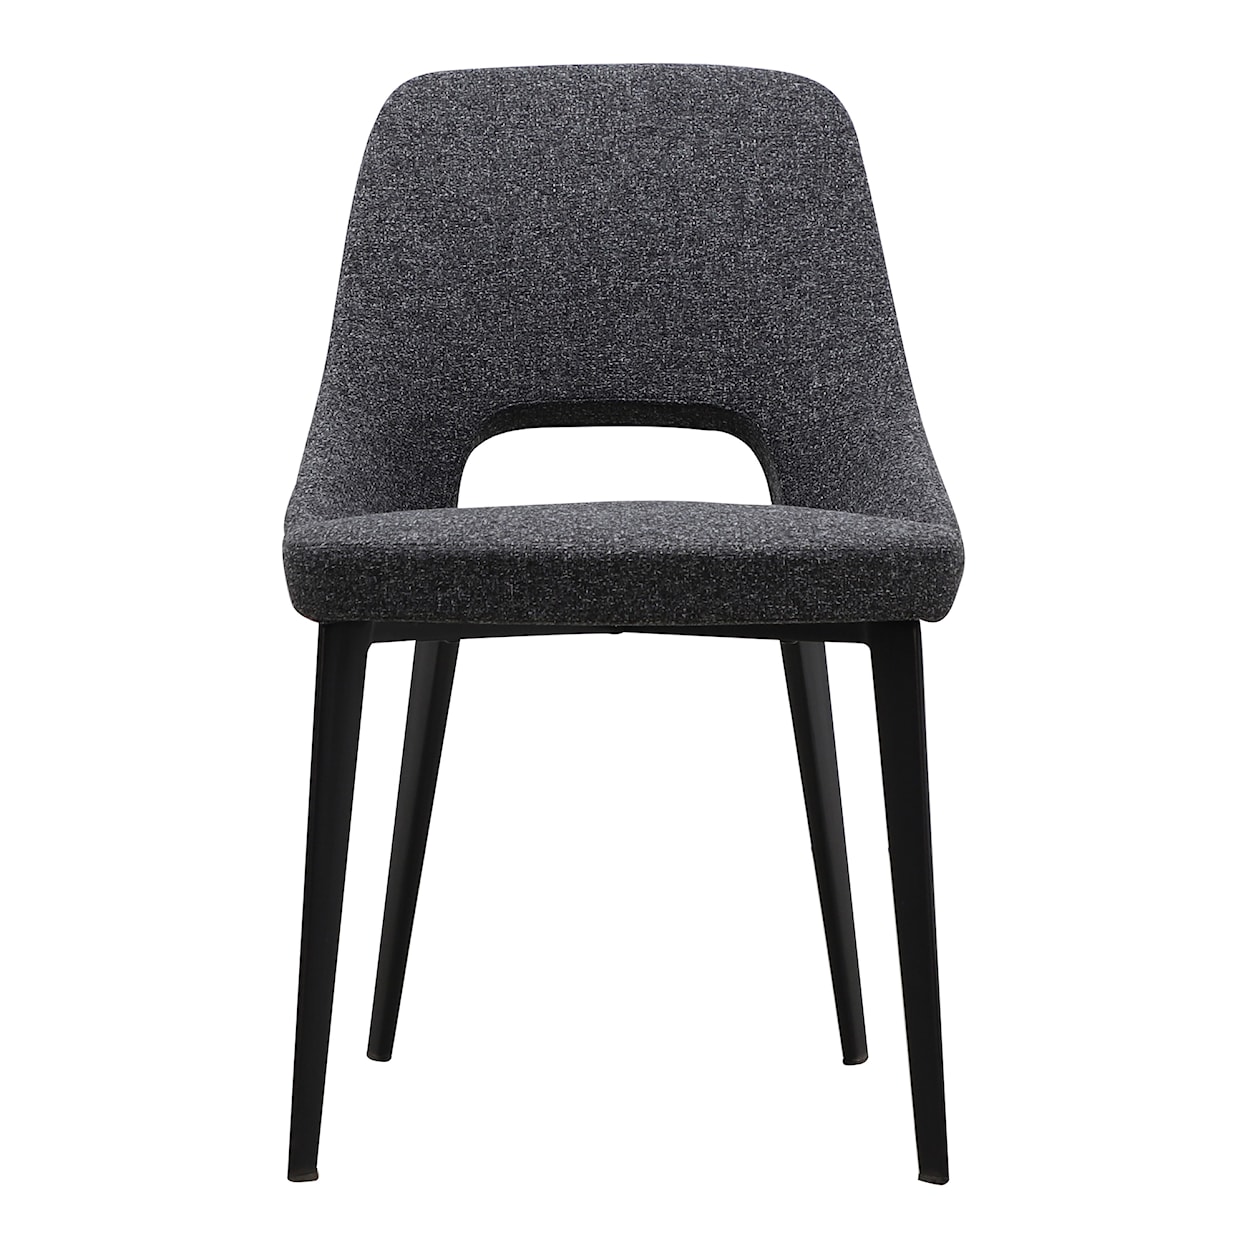 Moe's Home Collection Tizz Tizz Dining Chair Dark Grey